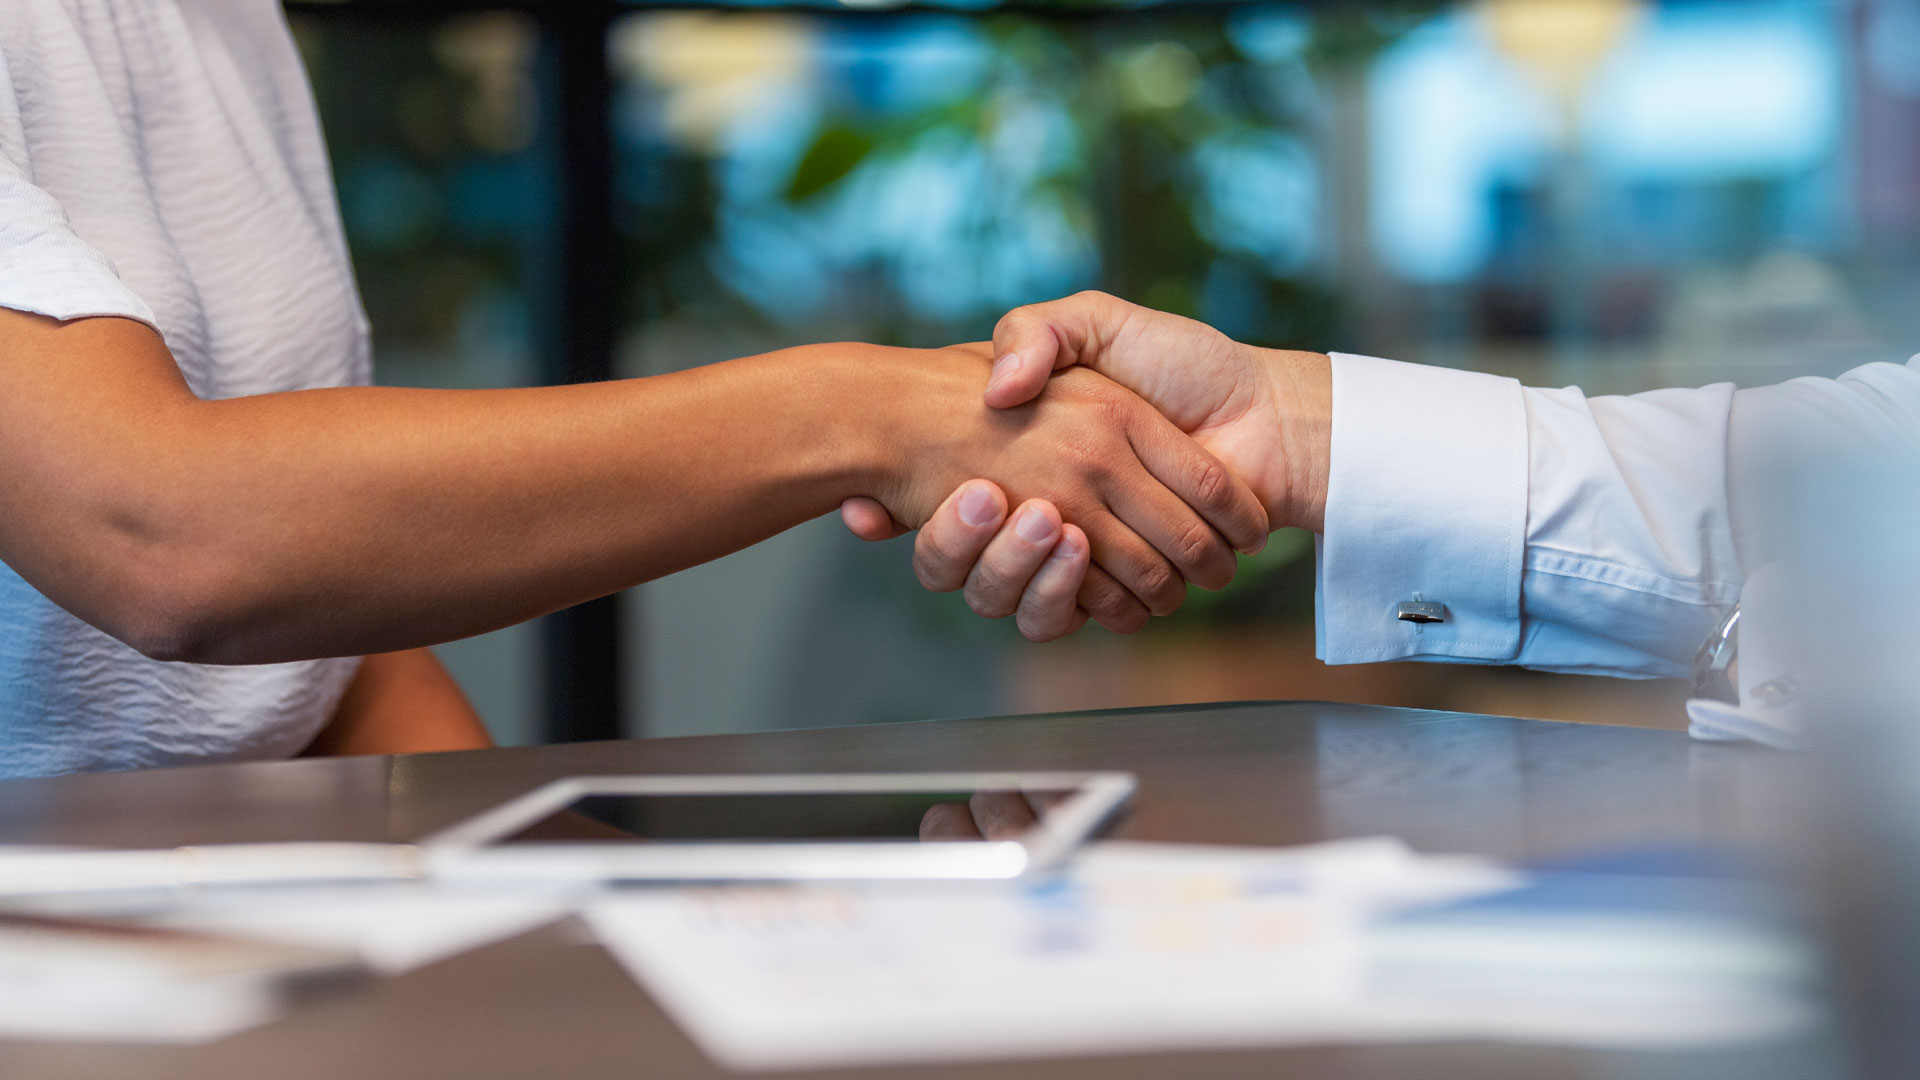 Image of business people shaking hands over a desk in an office.